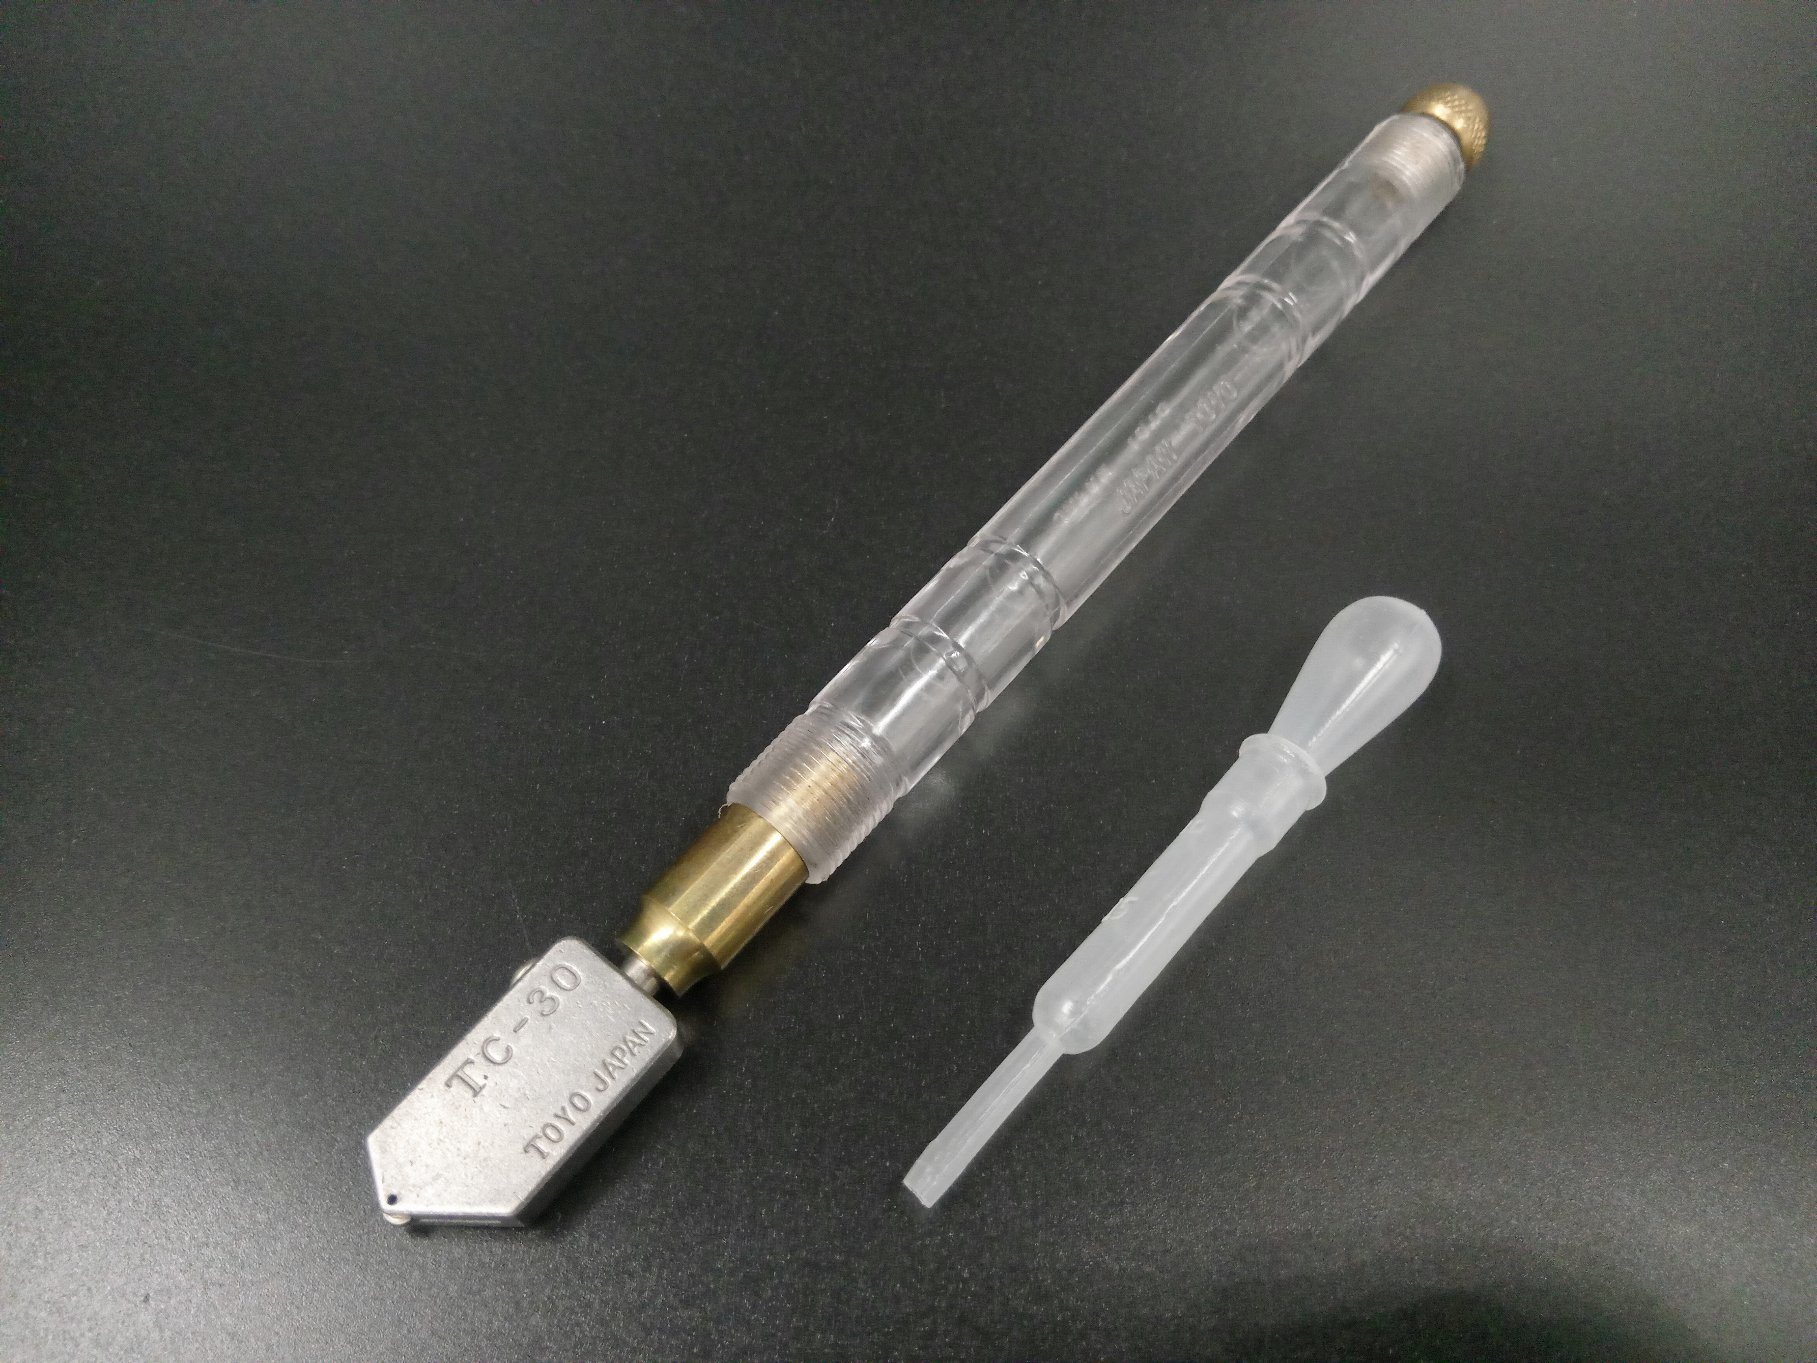 Transparent Plastic Oil-Filled Glass Cutter Hand Tool